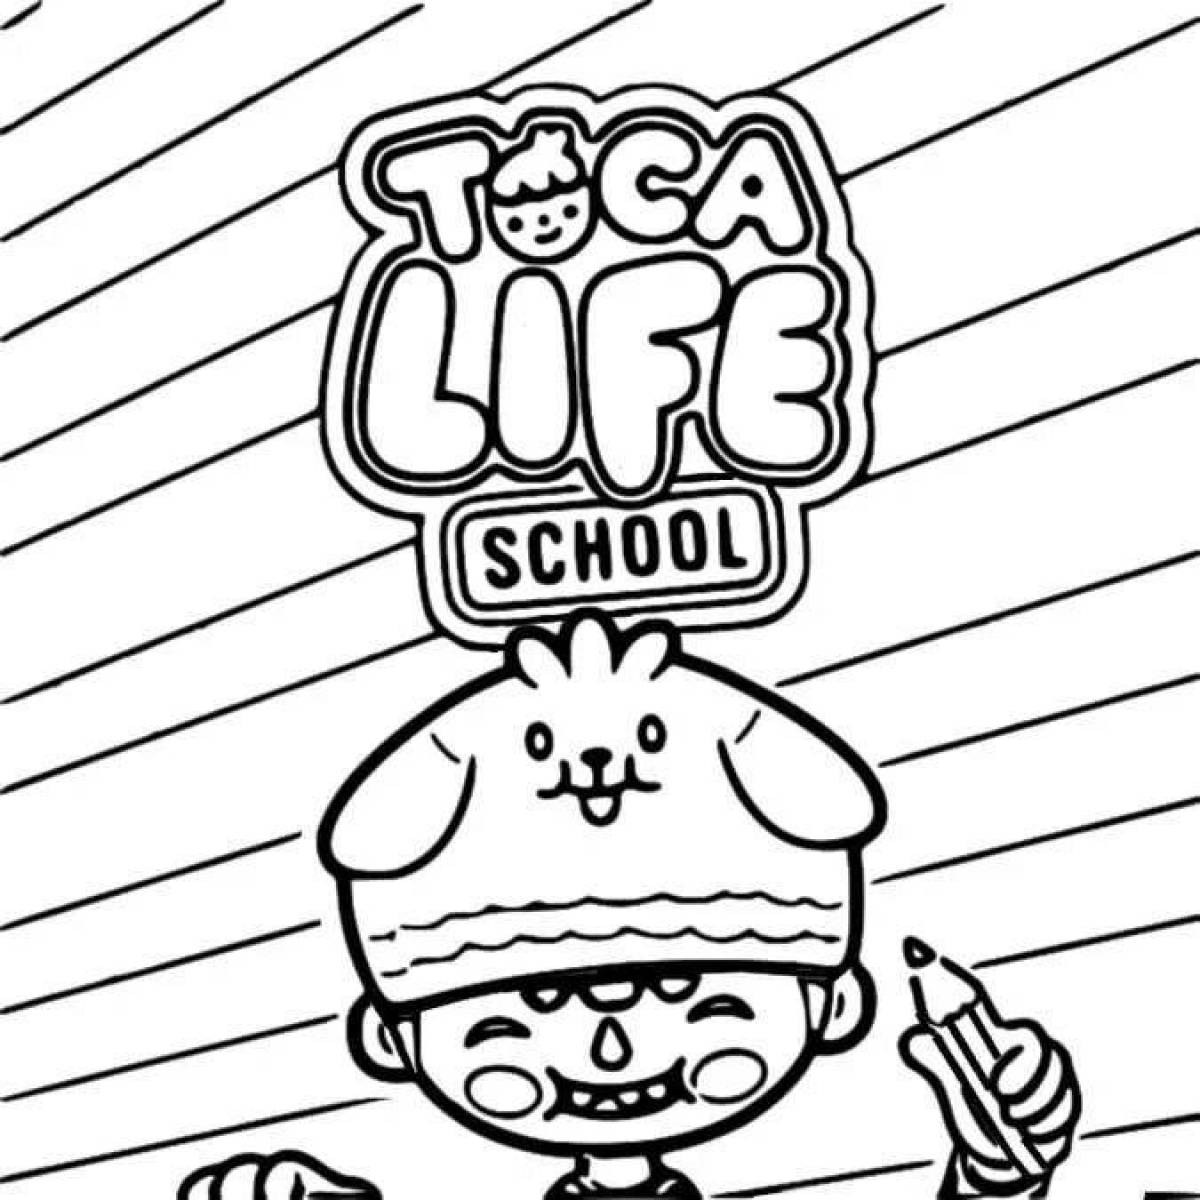 Glorious tosa vosa coloring page